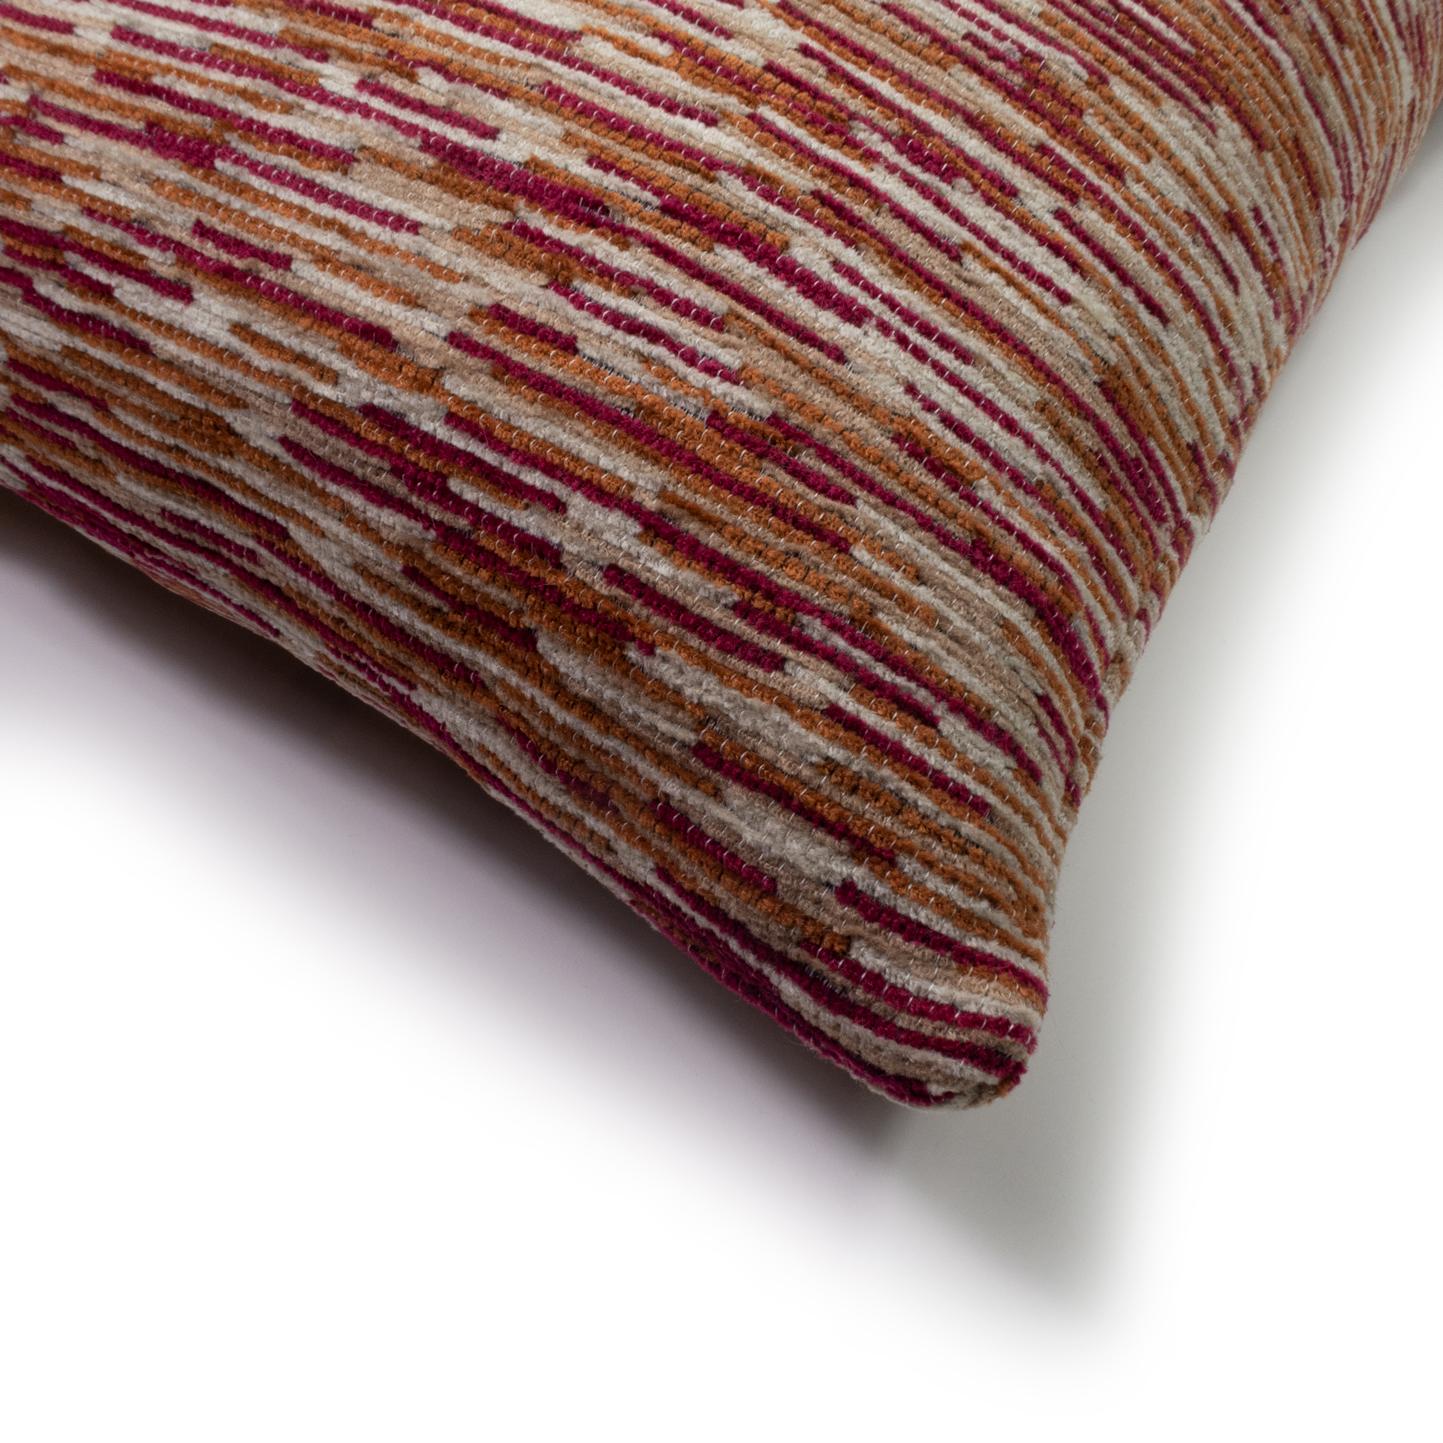 Hand-Crafted Modern Patterned Textured Pillow Multicolour 